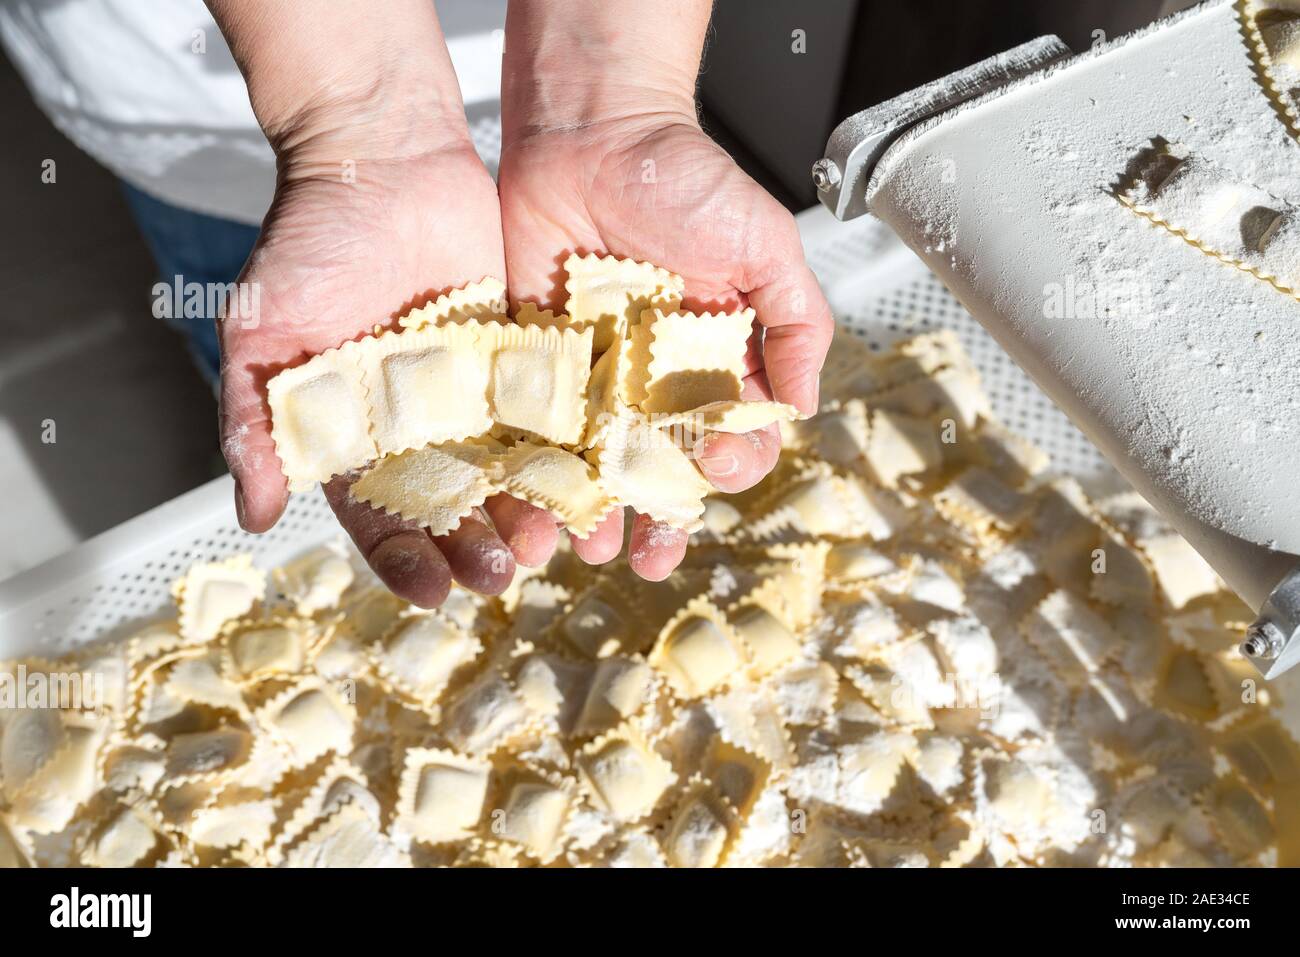 process of production of ravioli, tortellini and cappelletti, typical Italian fresh pasta - hands of the chef showing the freshly produced ravioli Stock Photo